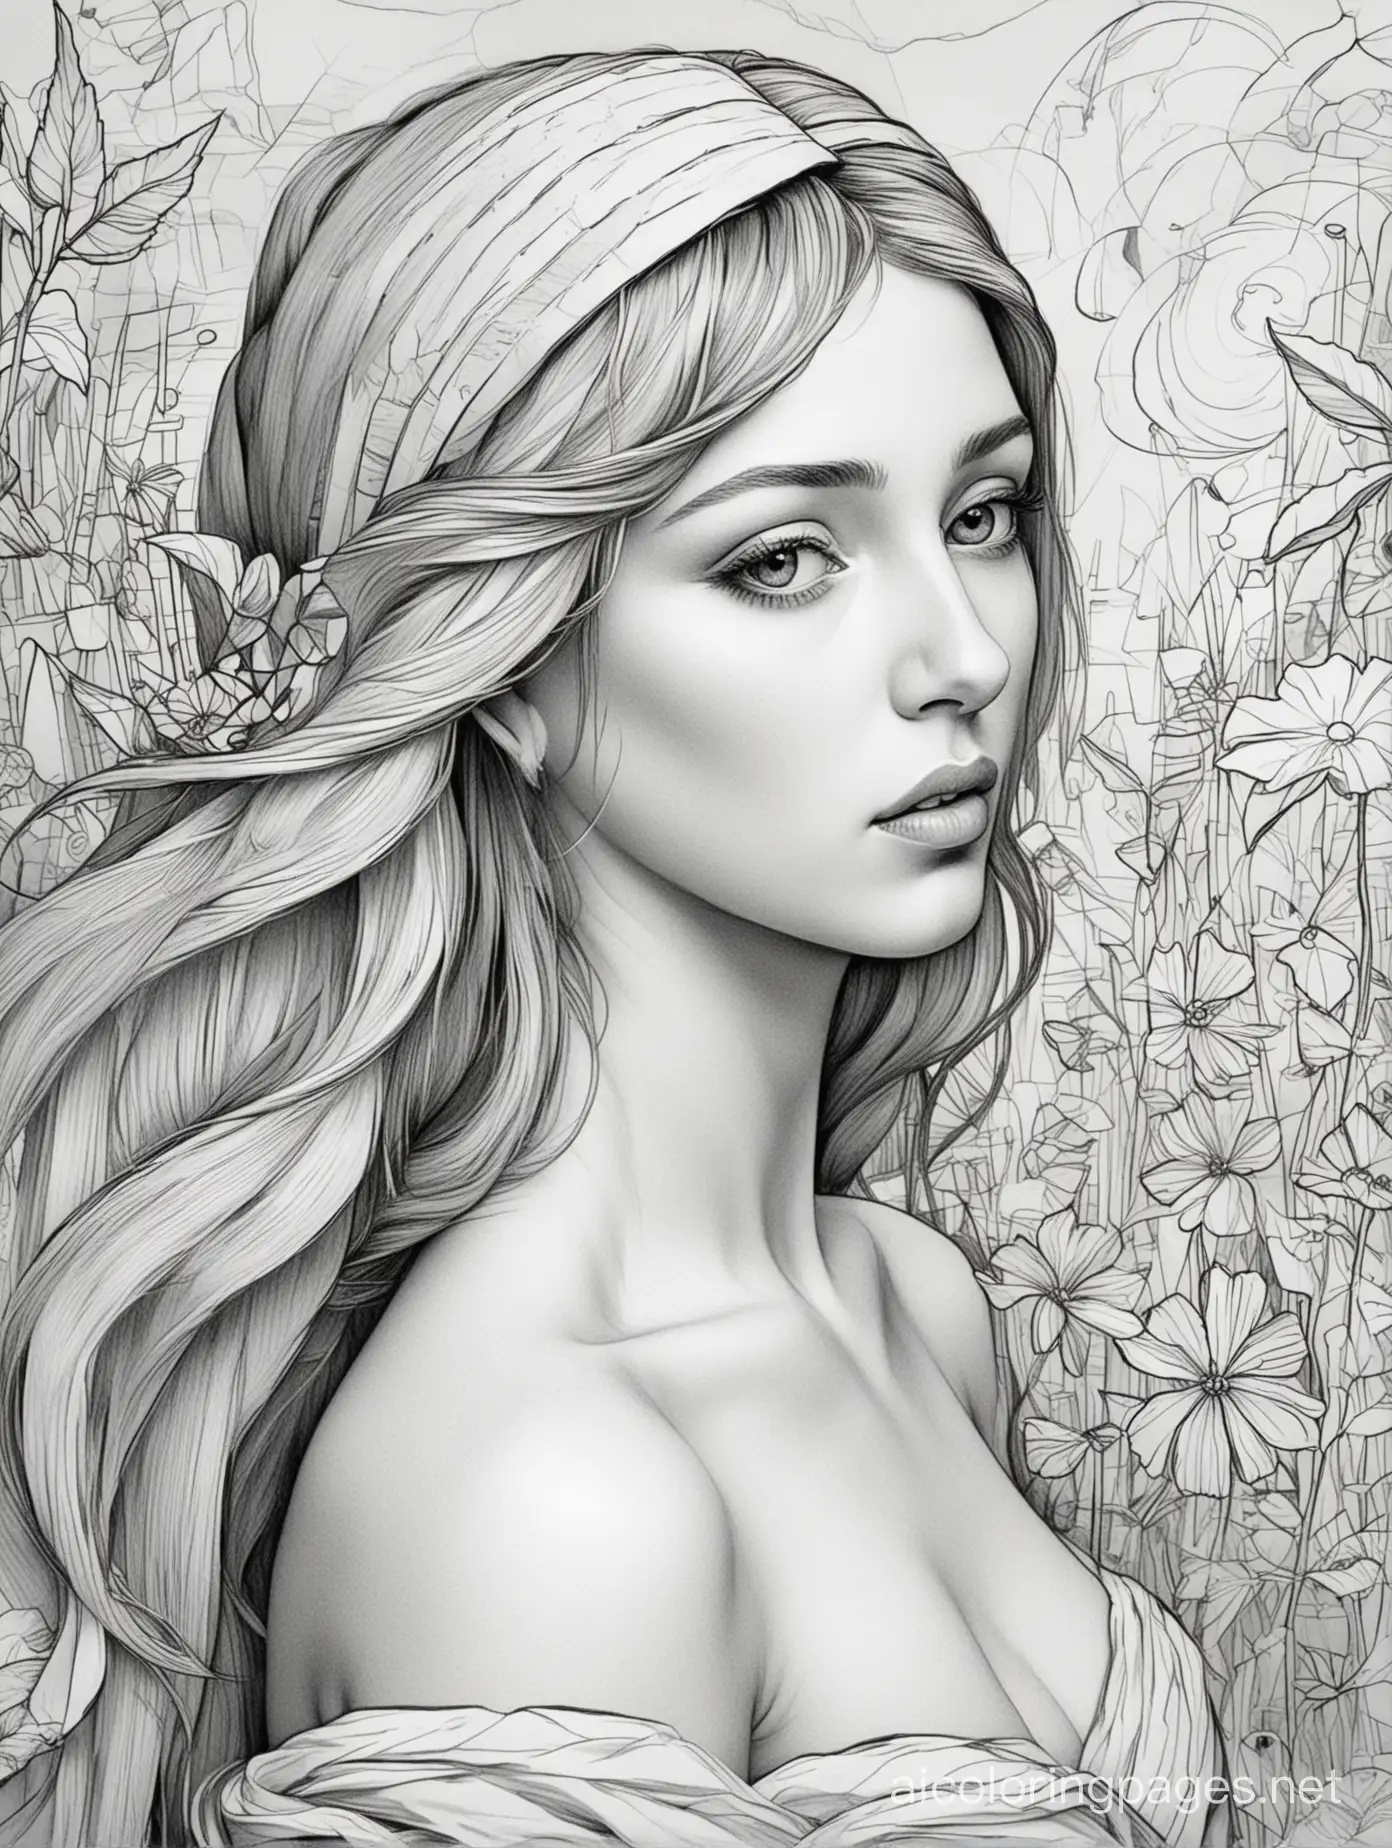 A beautiful figure from nowhere, , fantasy , ethereal , 

Picasso,, Van Gogh ,, Coloring Page, black and white, line art, white background, Simplicity, Ample White Space. The background of the coloring page is plain white to make it easy for young children to color within the lines. The outlines of all the subjects are easy to distinguish, making it simple for kids to color without too much difficulty